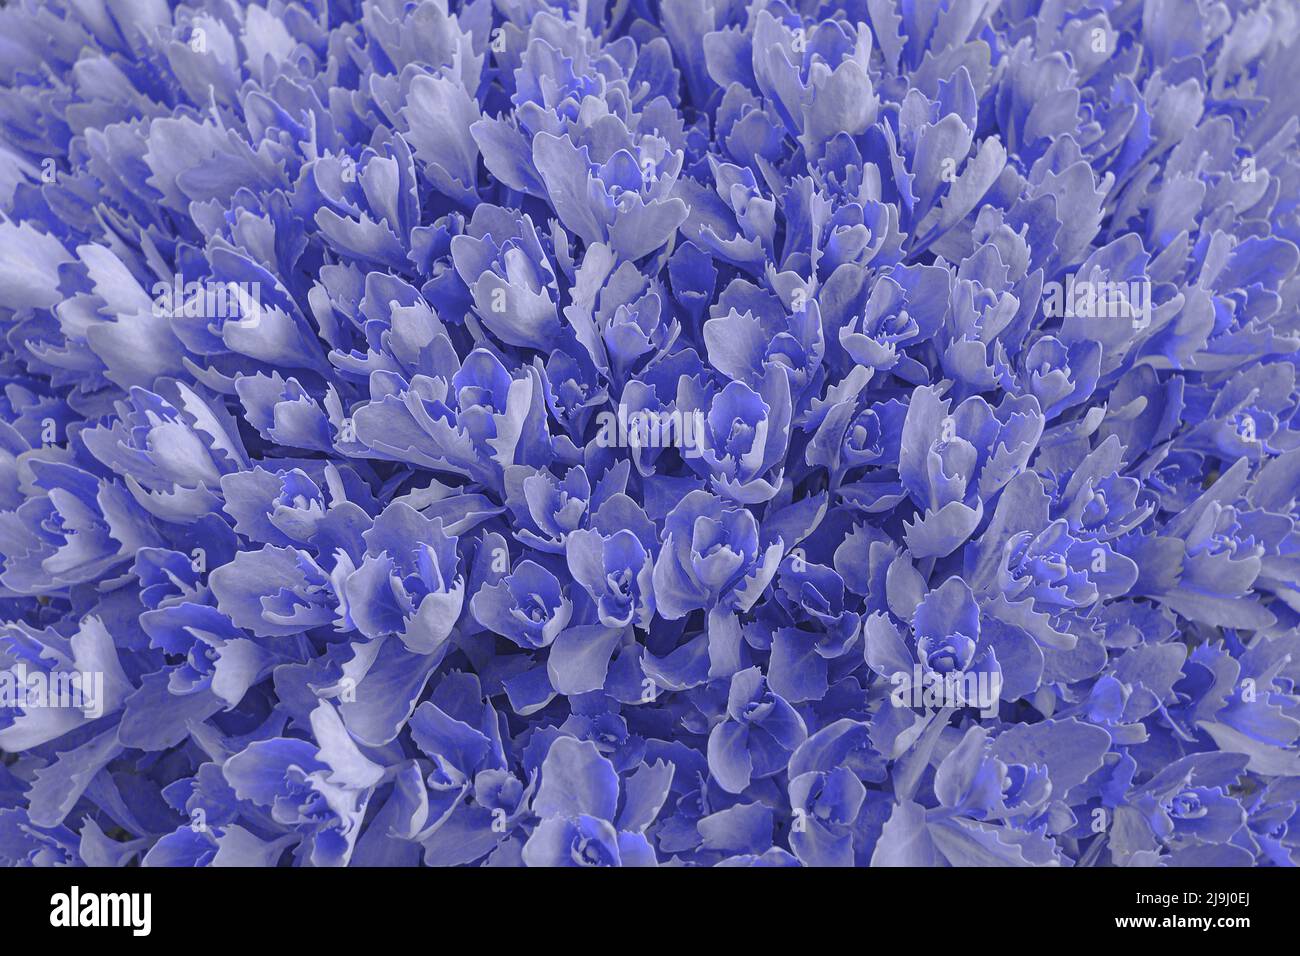 Cones of thick leaves of the plant in the garden, grown into a large clump. A picture tinted in 2022 colors (Pantone Very Peri 17-3938). Stock Photo